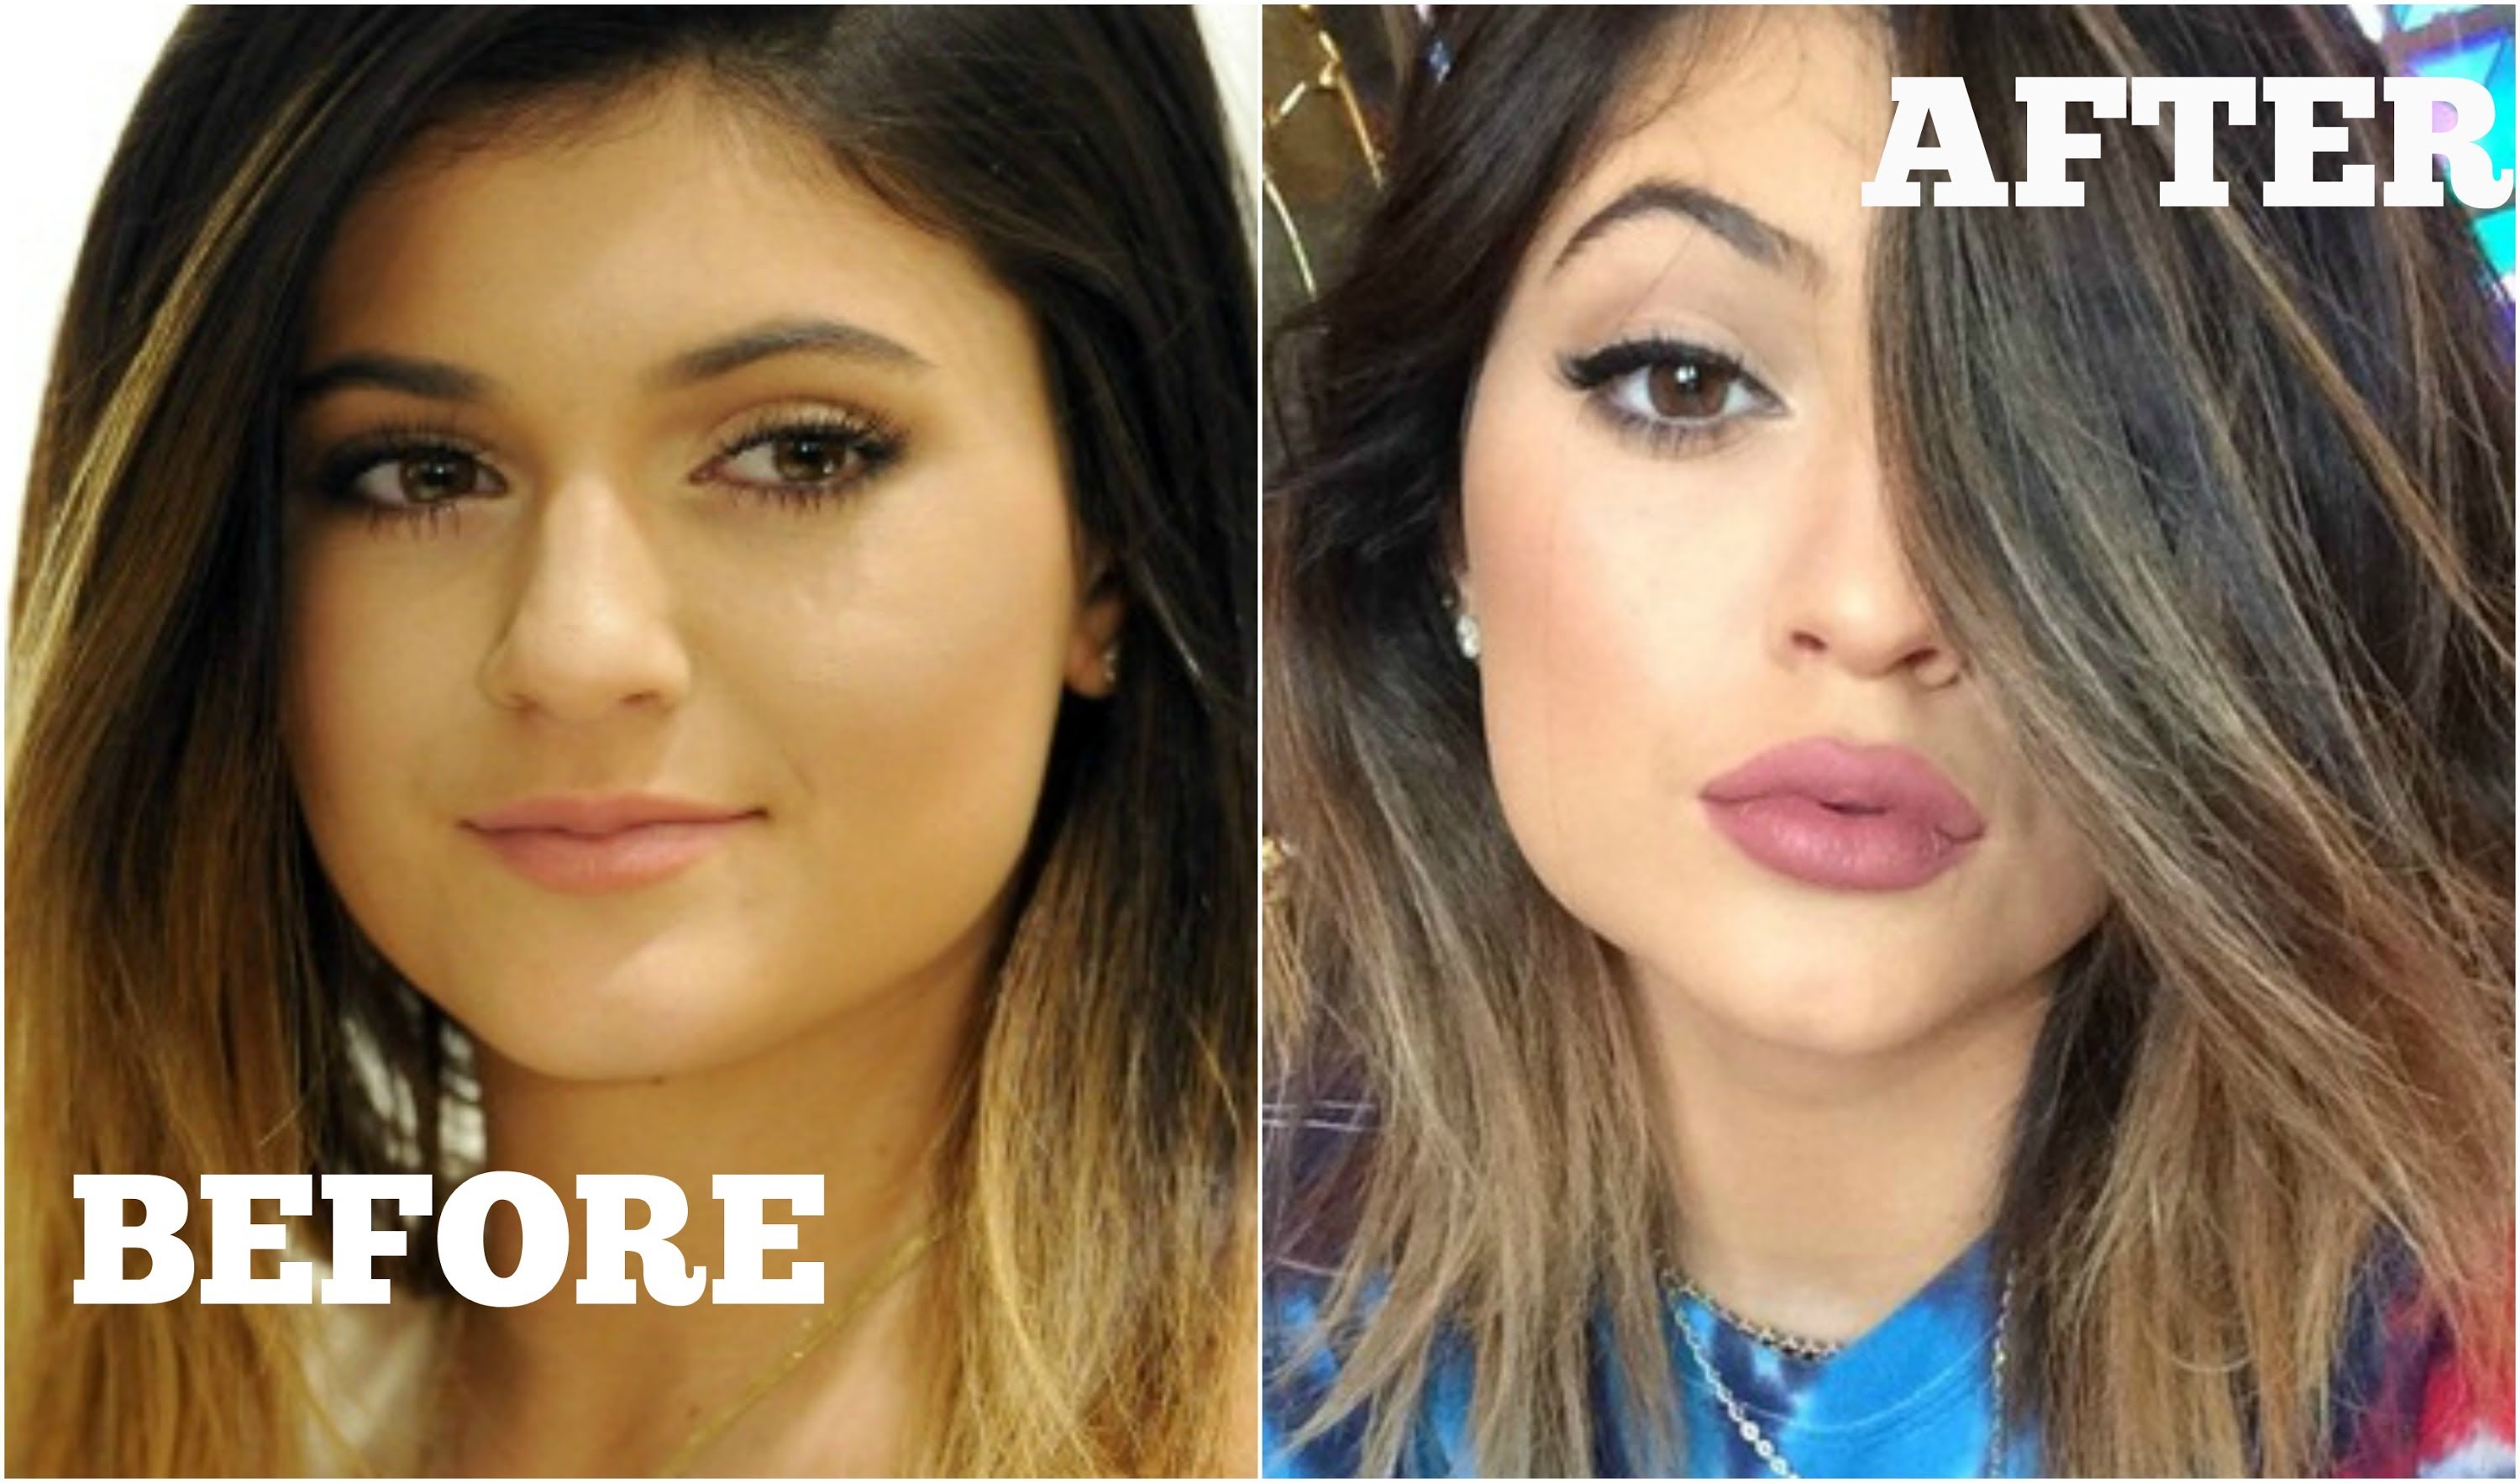 How To Look Like Kylie Jenner